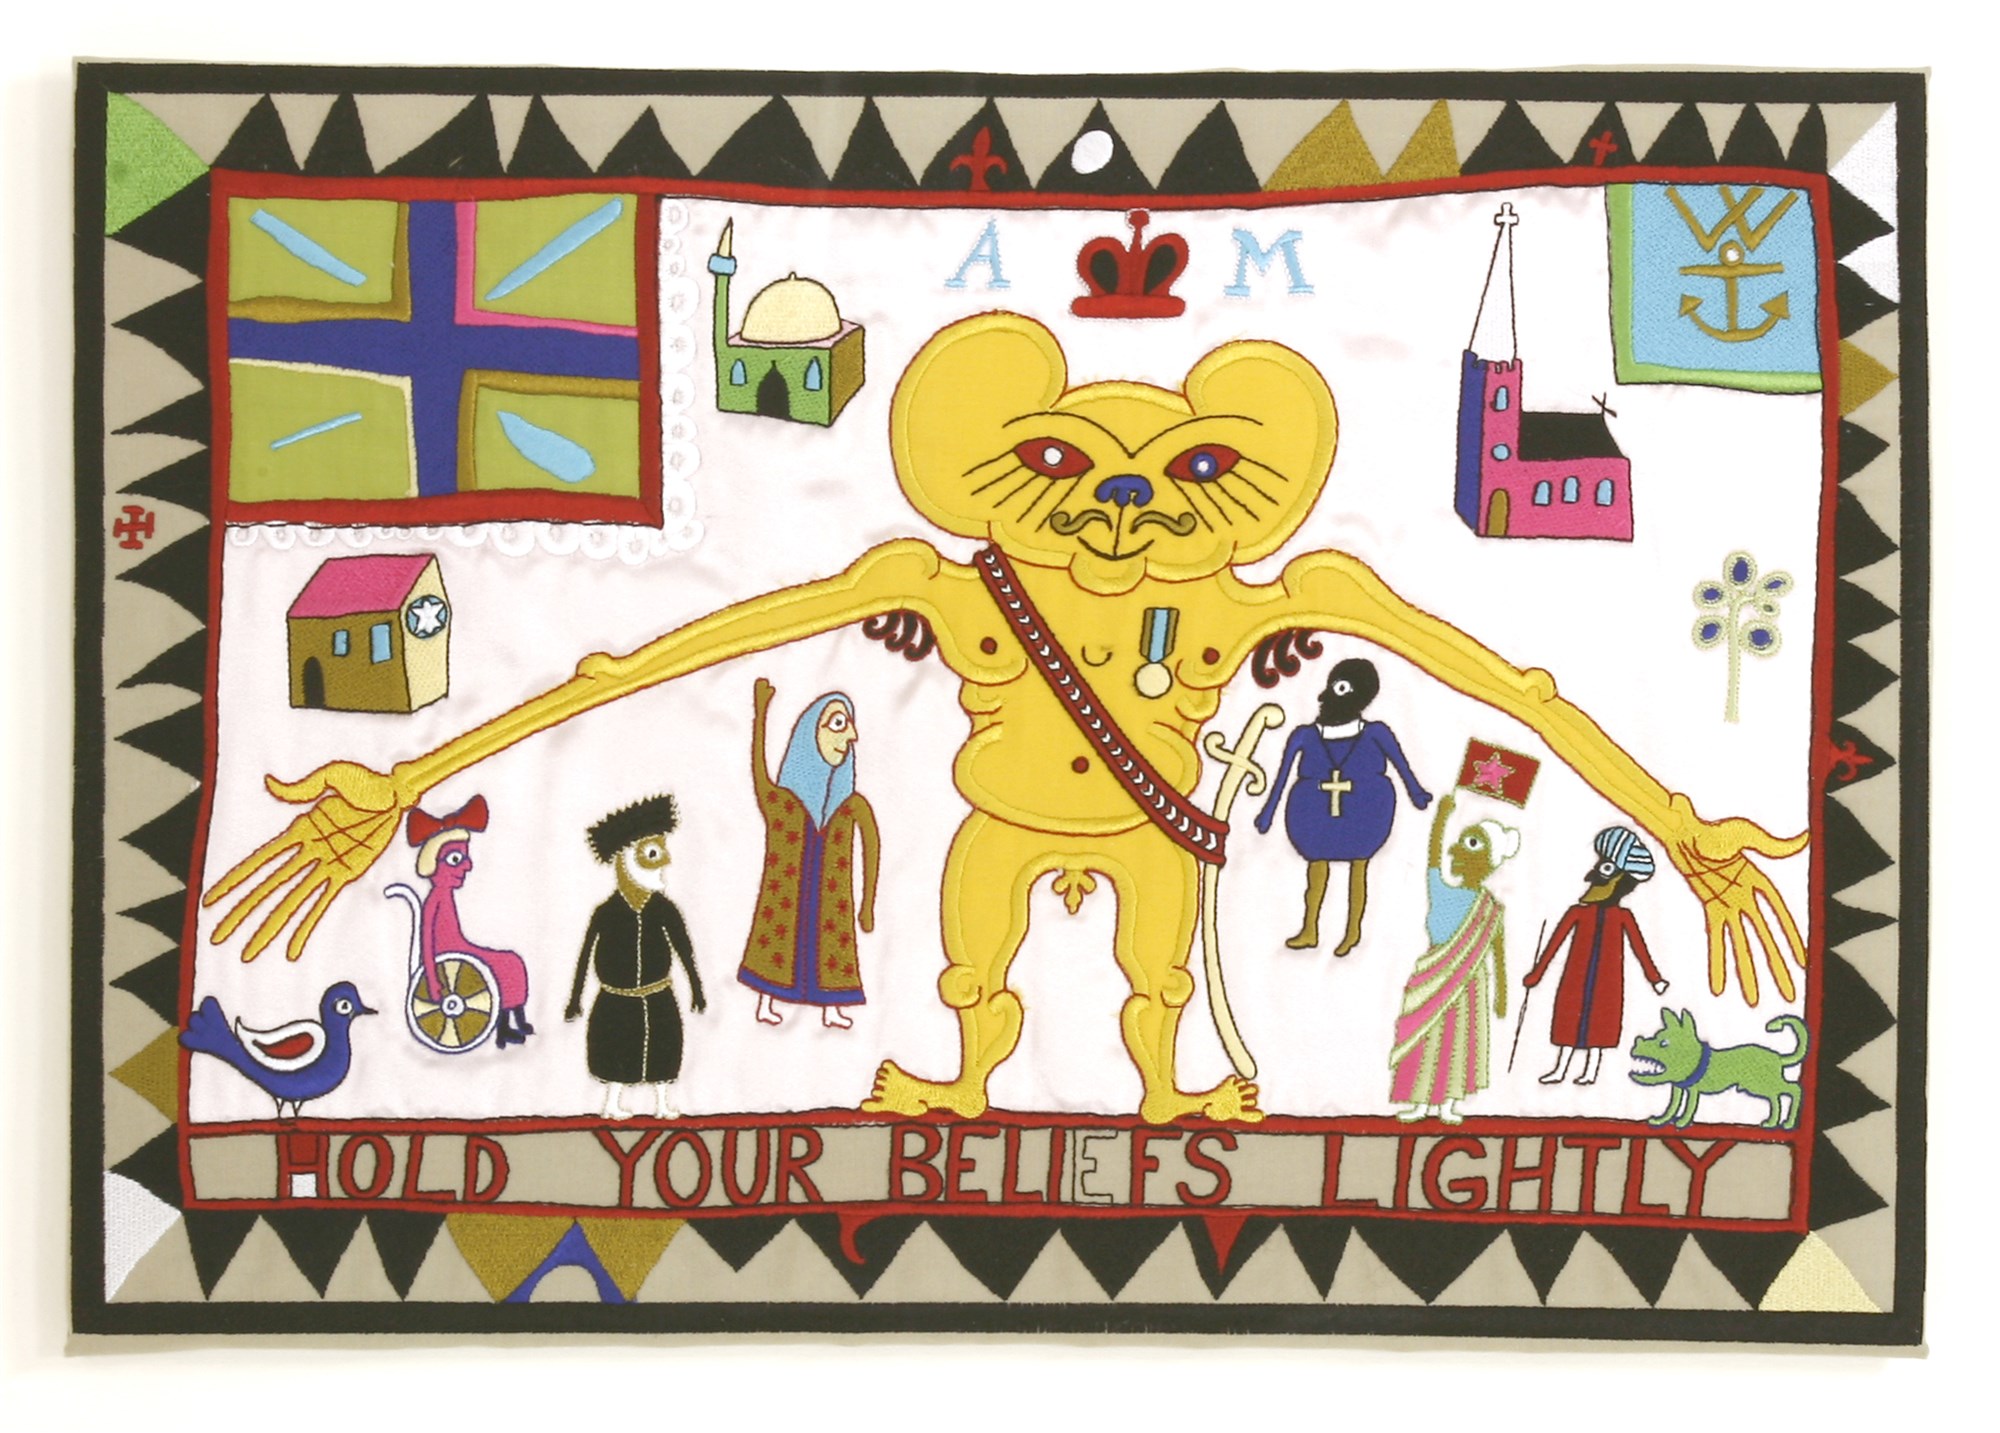 Grayson Perry - Hold you beliefs lightly